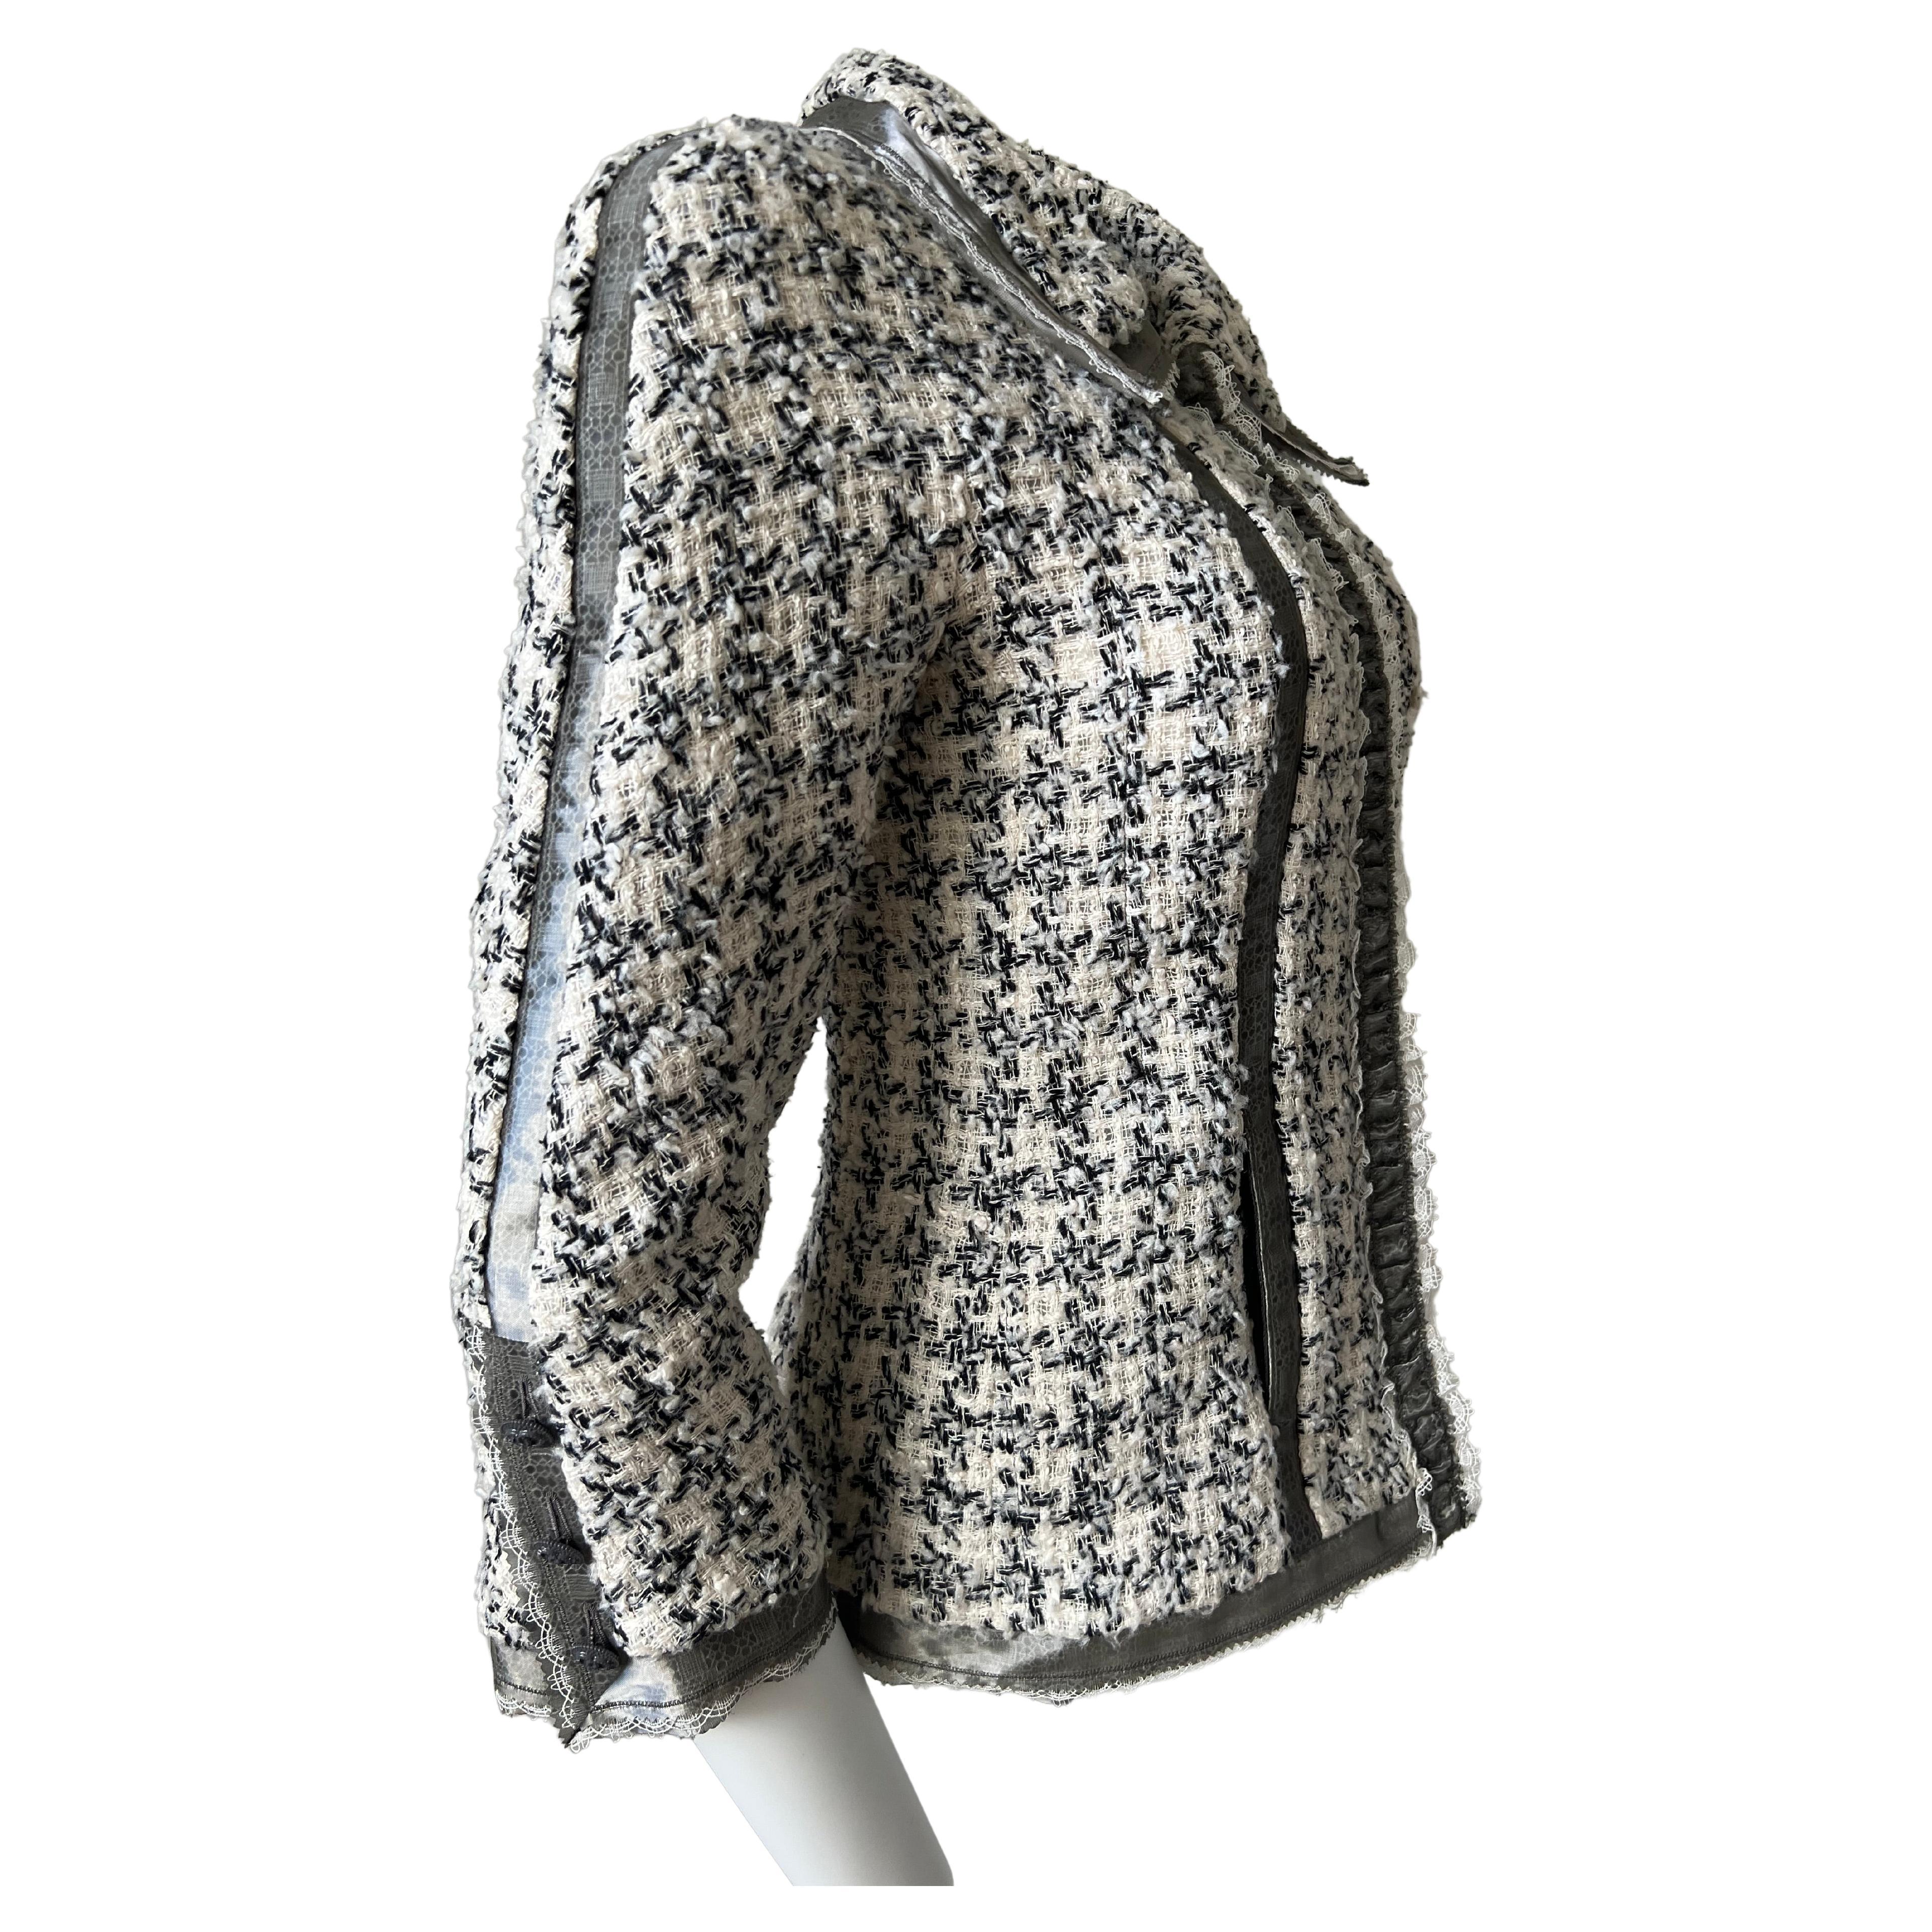 Superb black and white silk tweed jacket. Strips of gallon of white Pasementerie stitched by a strip of black silk. Zip closure marked Chanel, three buttons on the ends of each sleeve. A delicat and luxurious work make this Chanel Jacket a piece of